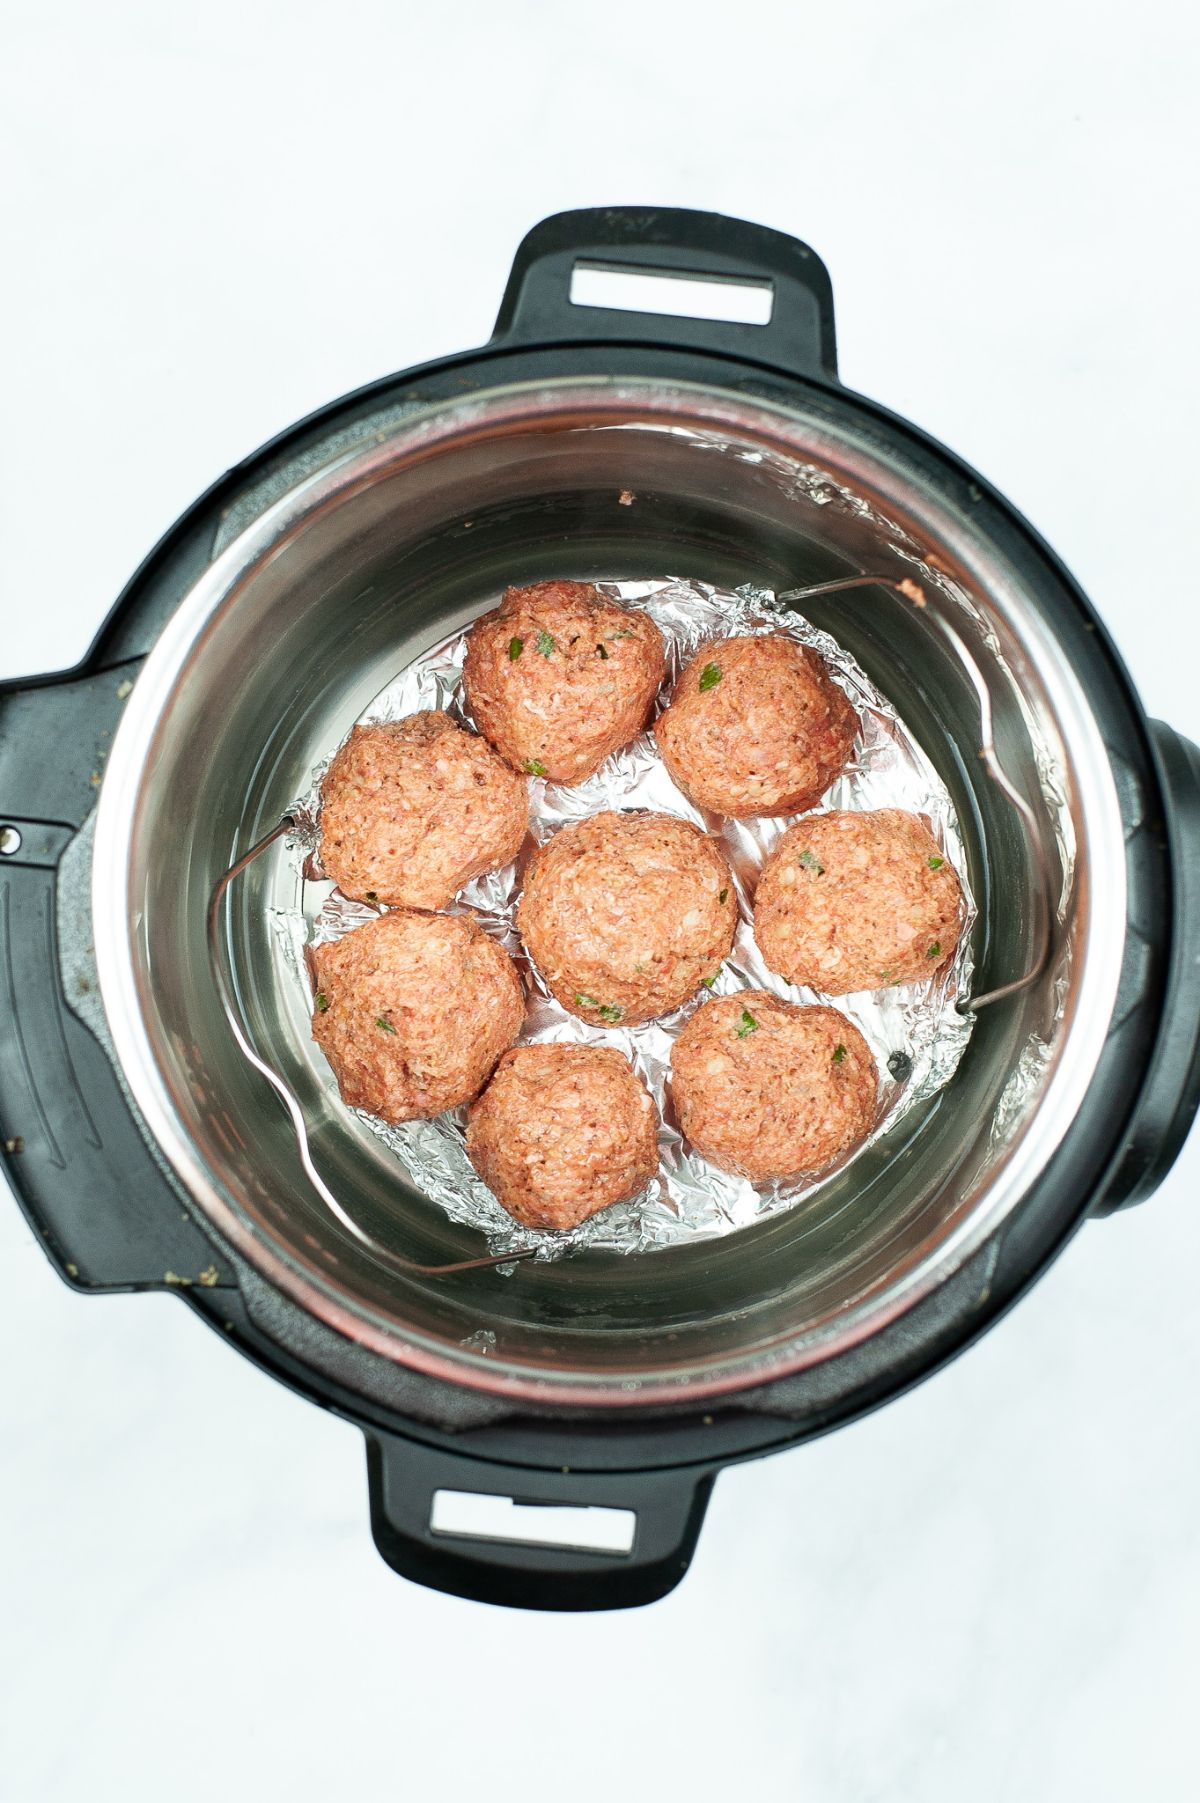 Shaped meatballs placed in an instant pot ready for cooking.